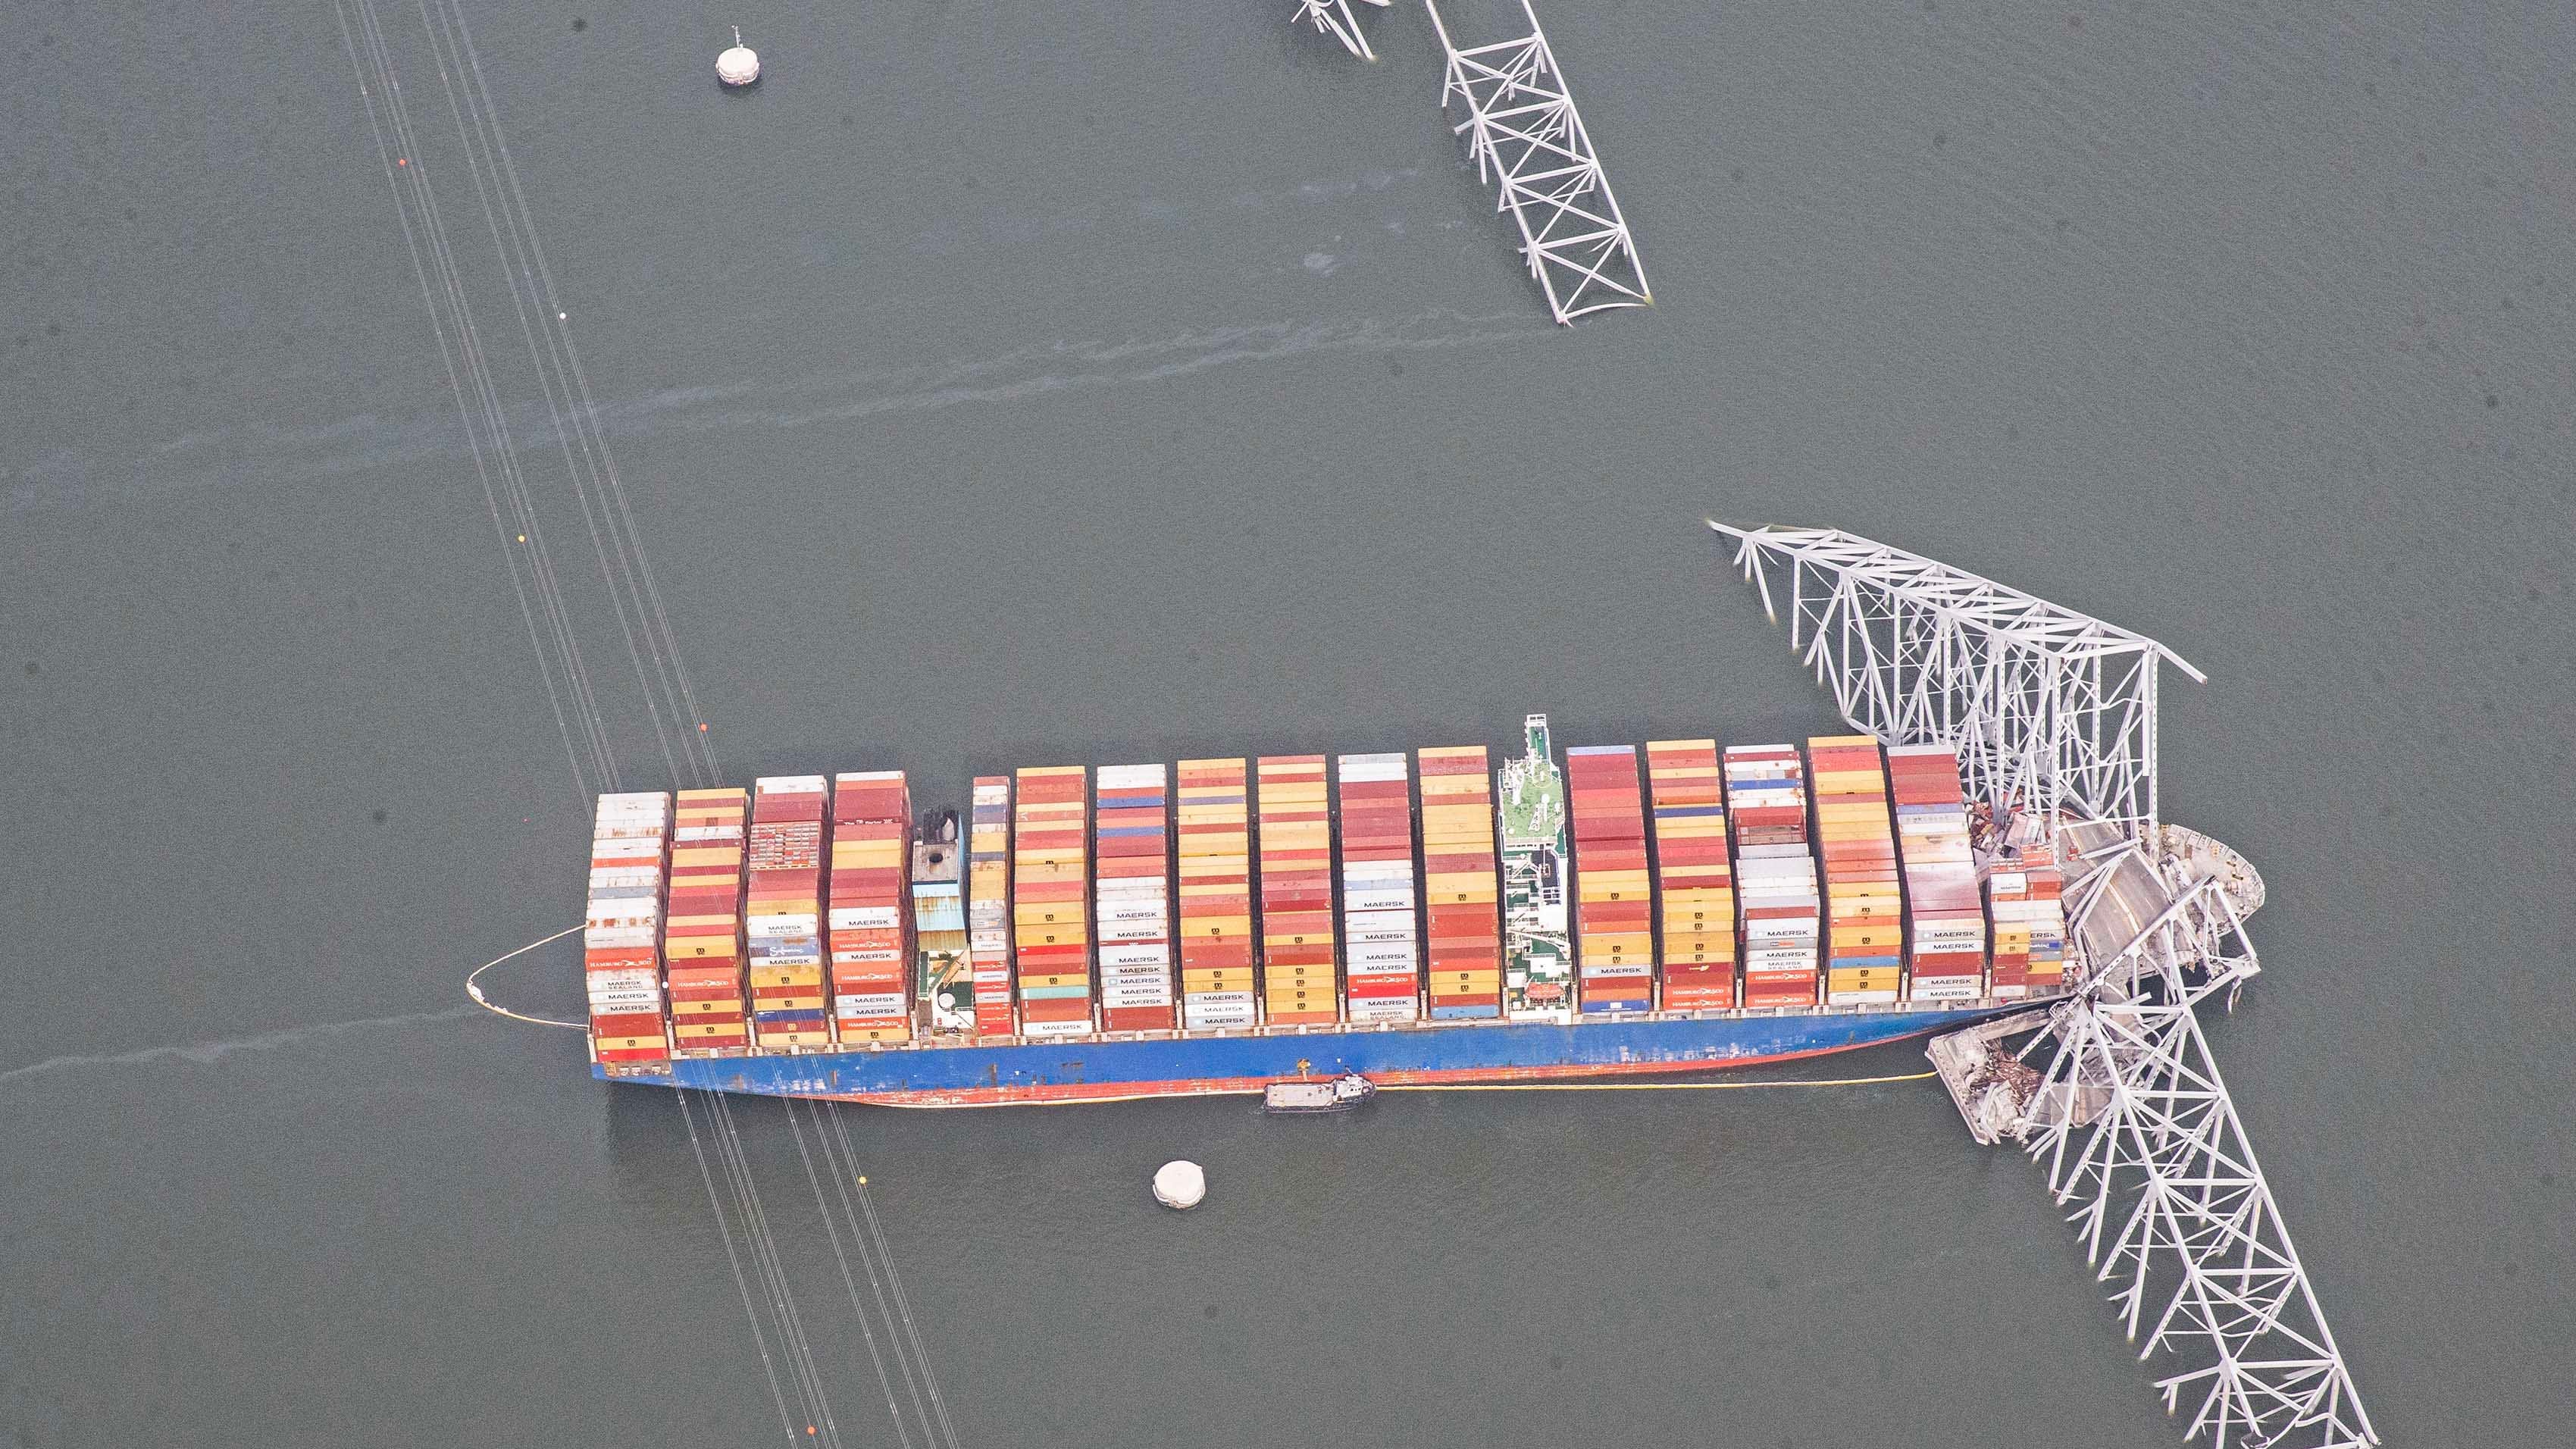 Can NJz ports handle tha added traffic n' cargo from Baltimore?